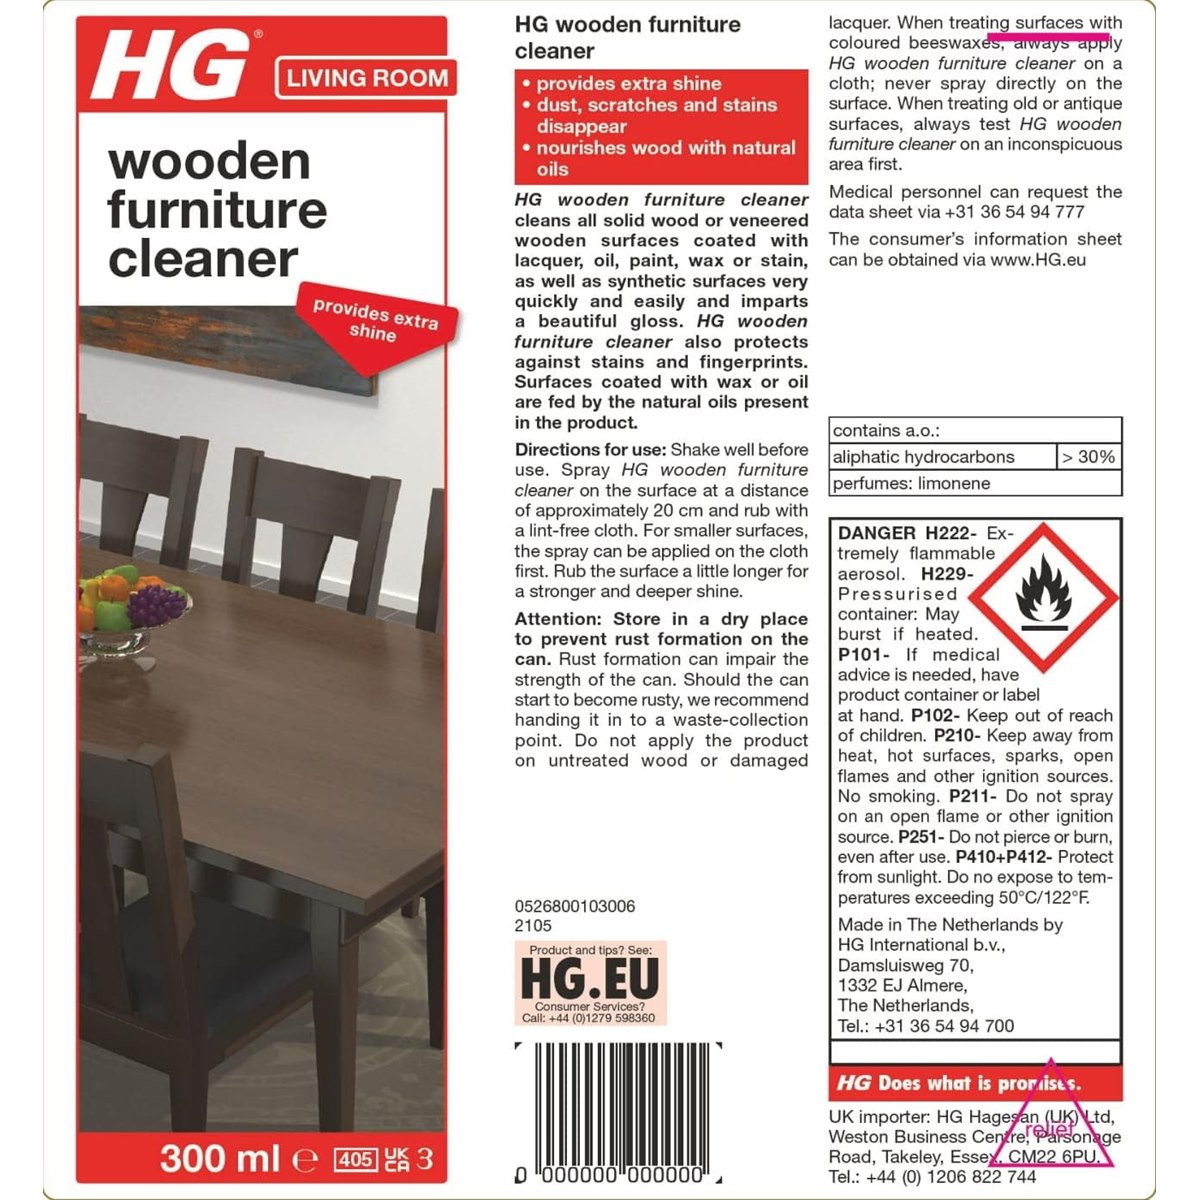 HG Wooden Furniture Cleaner Spray Instructions